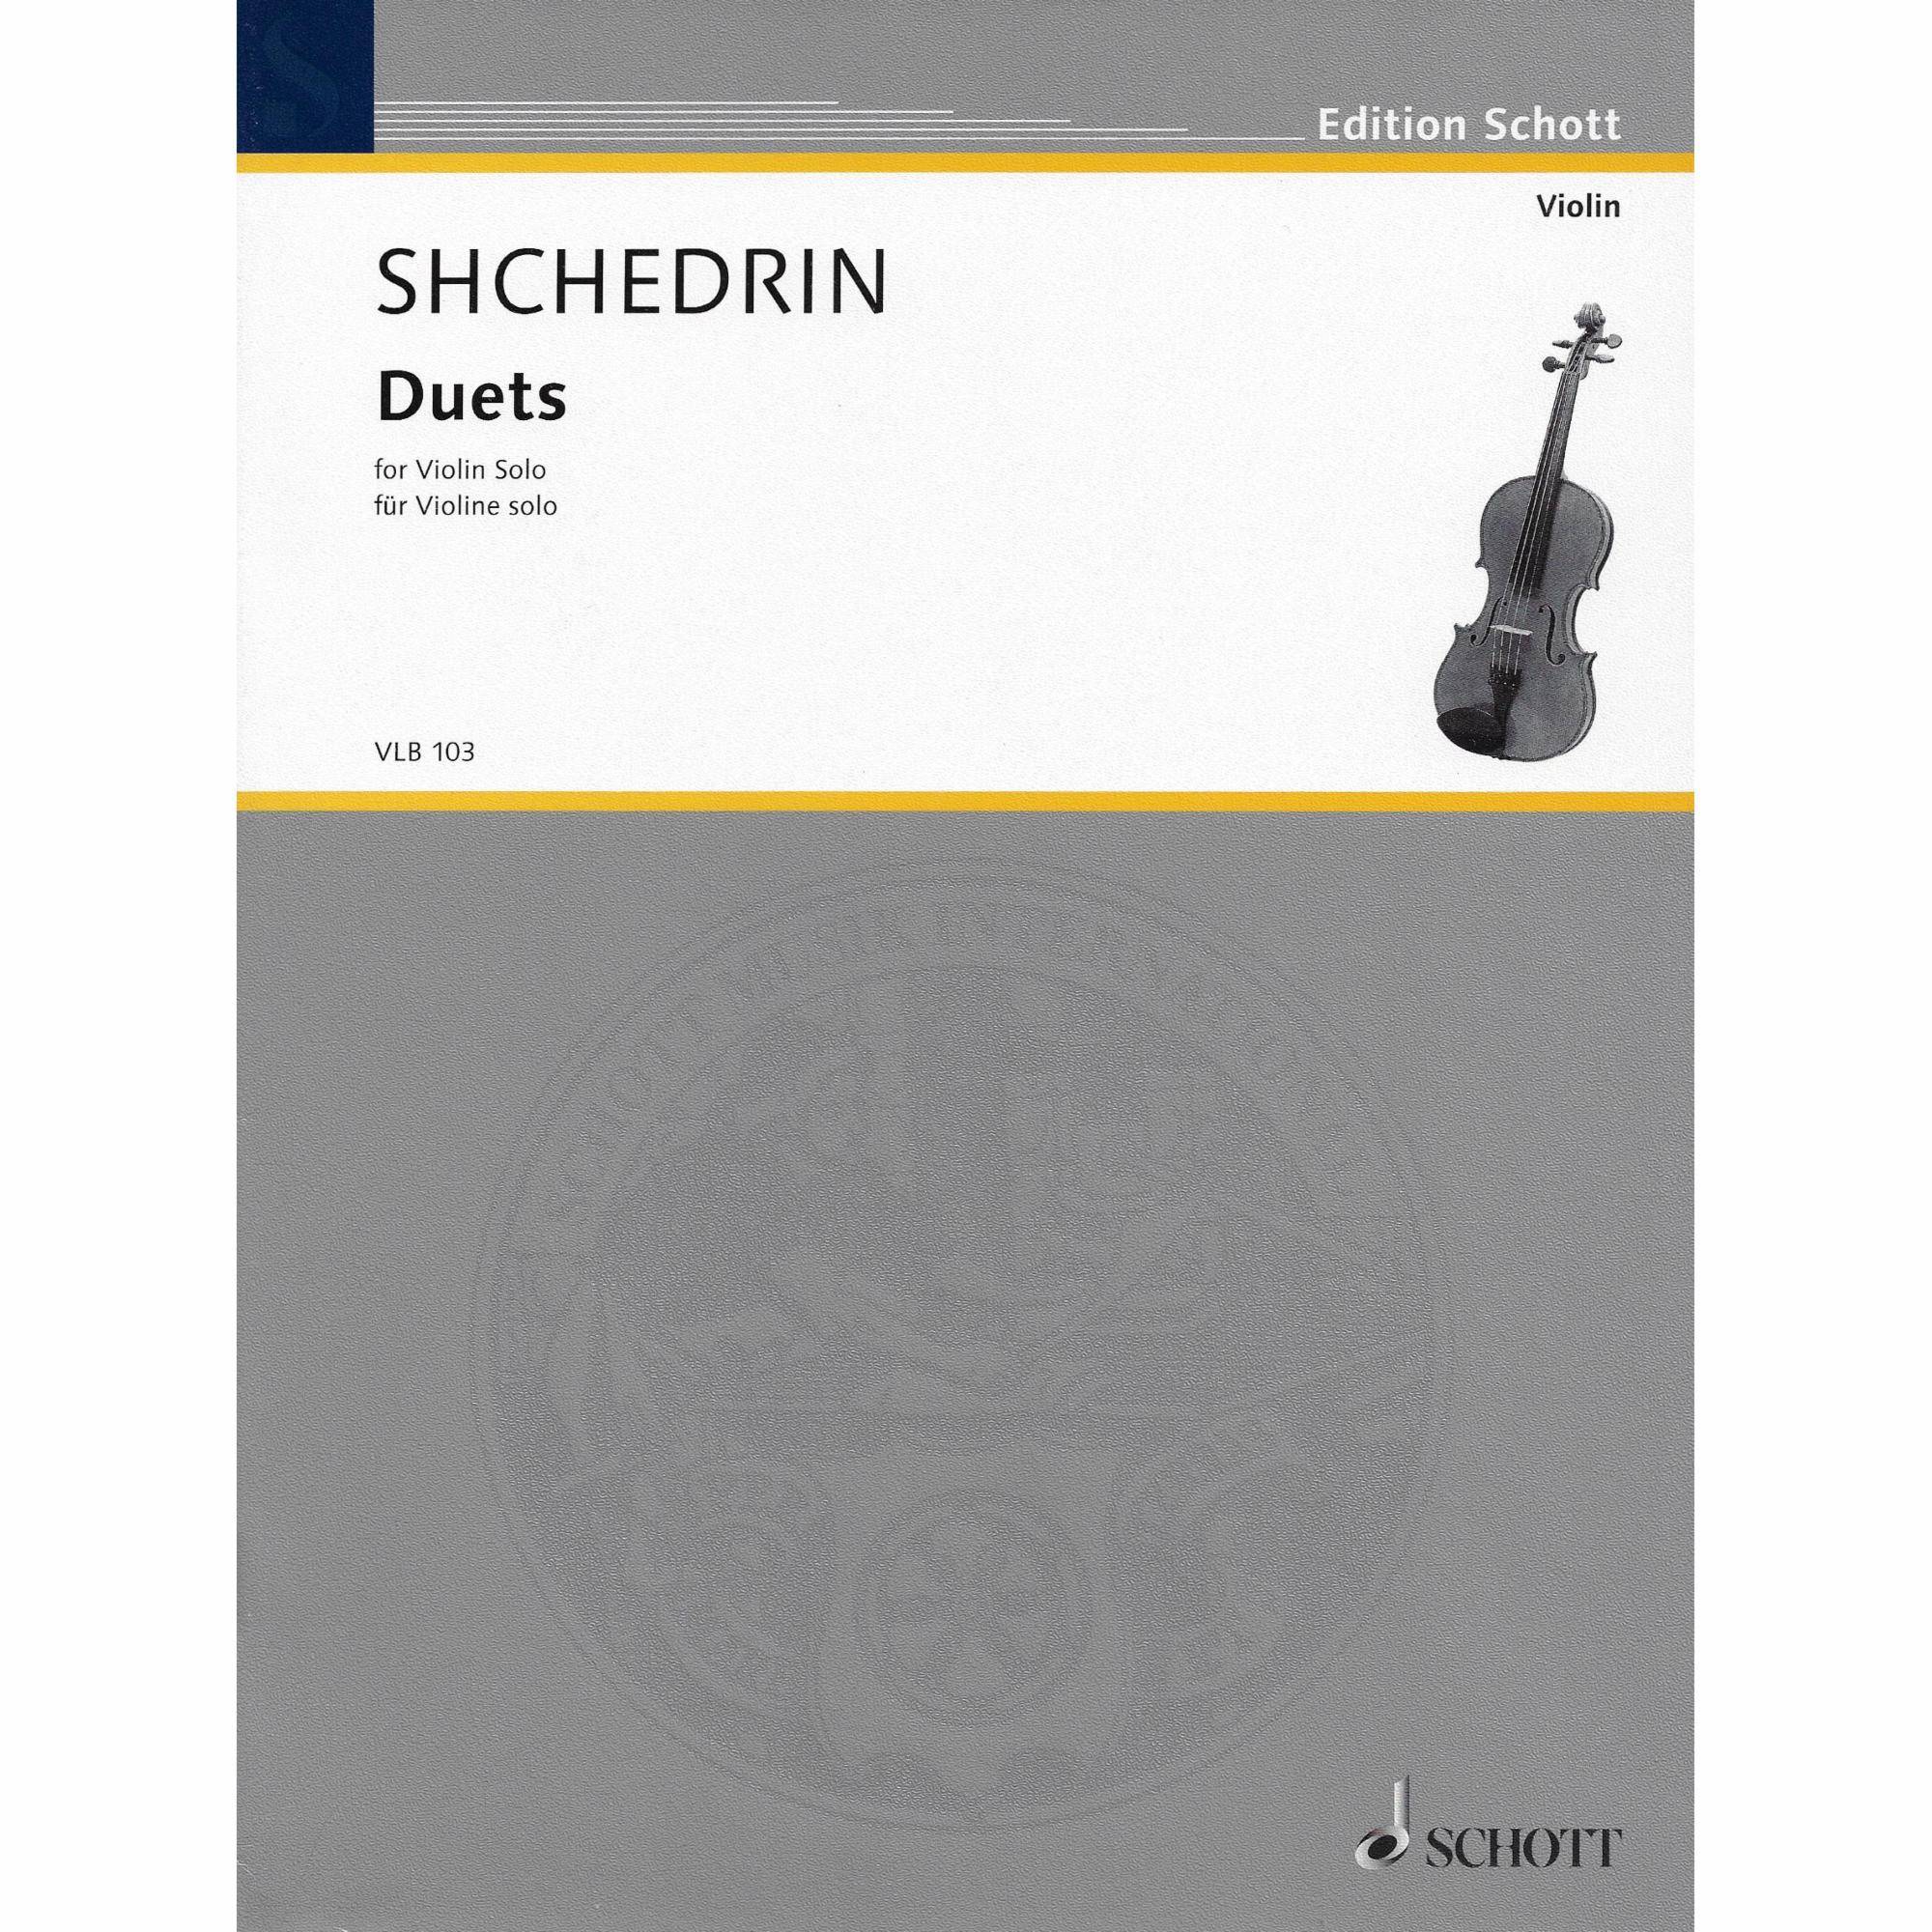 Shchedrin -- Duets for Solo Violin